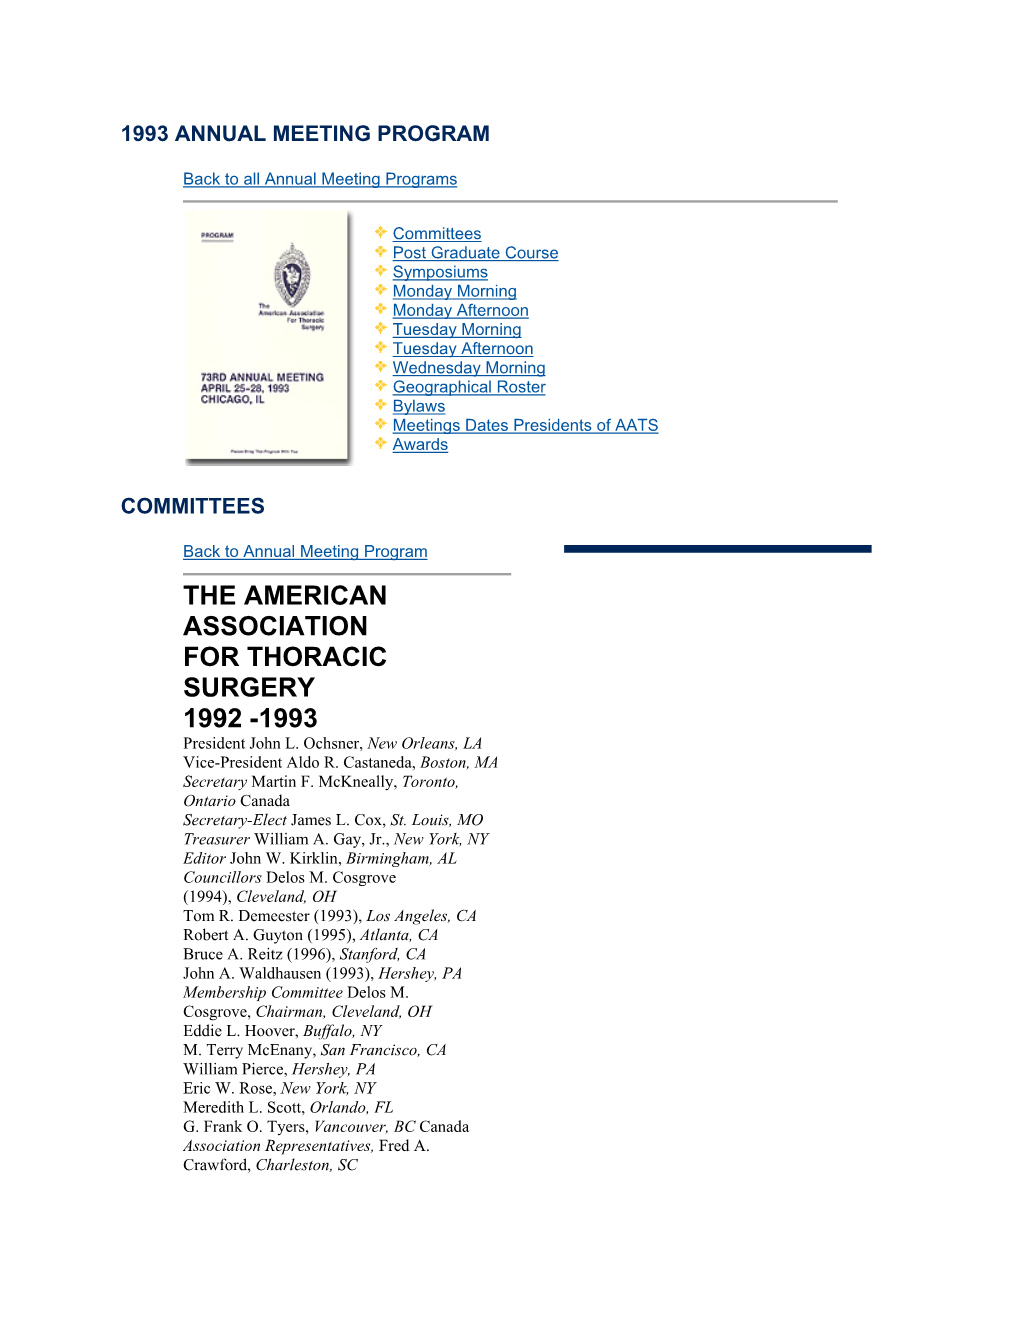 The American Association for Thoracic Surgery 1992 -1993